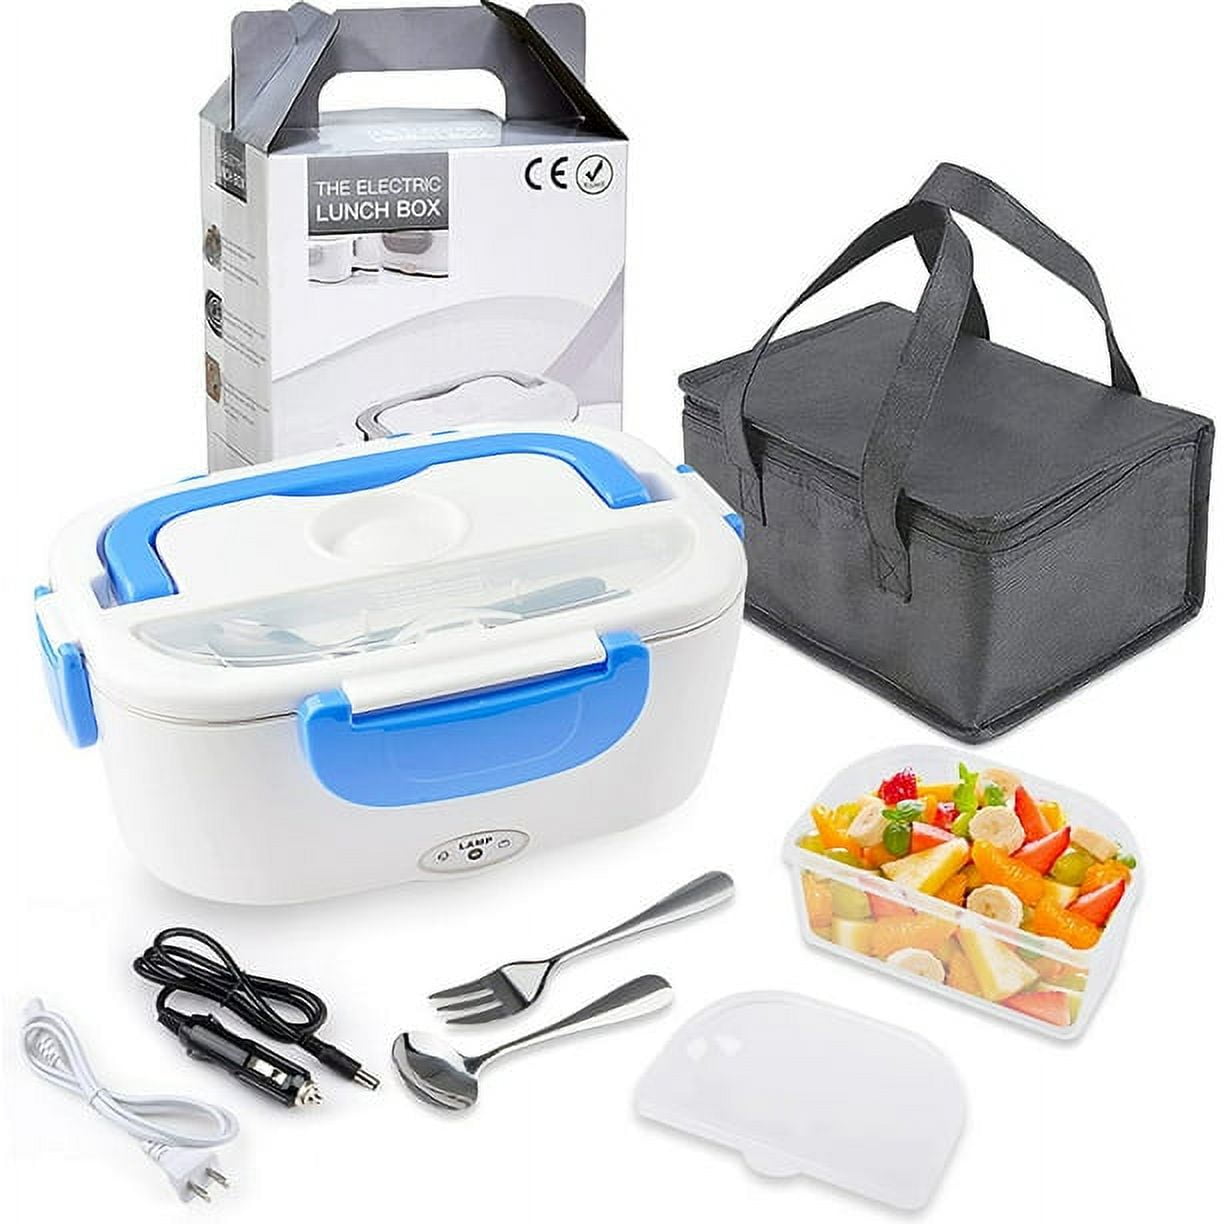 Salton Black 1.58 Insulated Self-heating Lunch Box in the Portable Coolers  department at